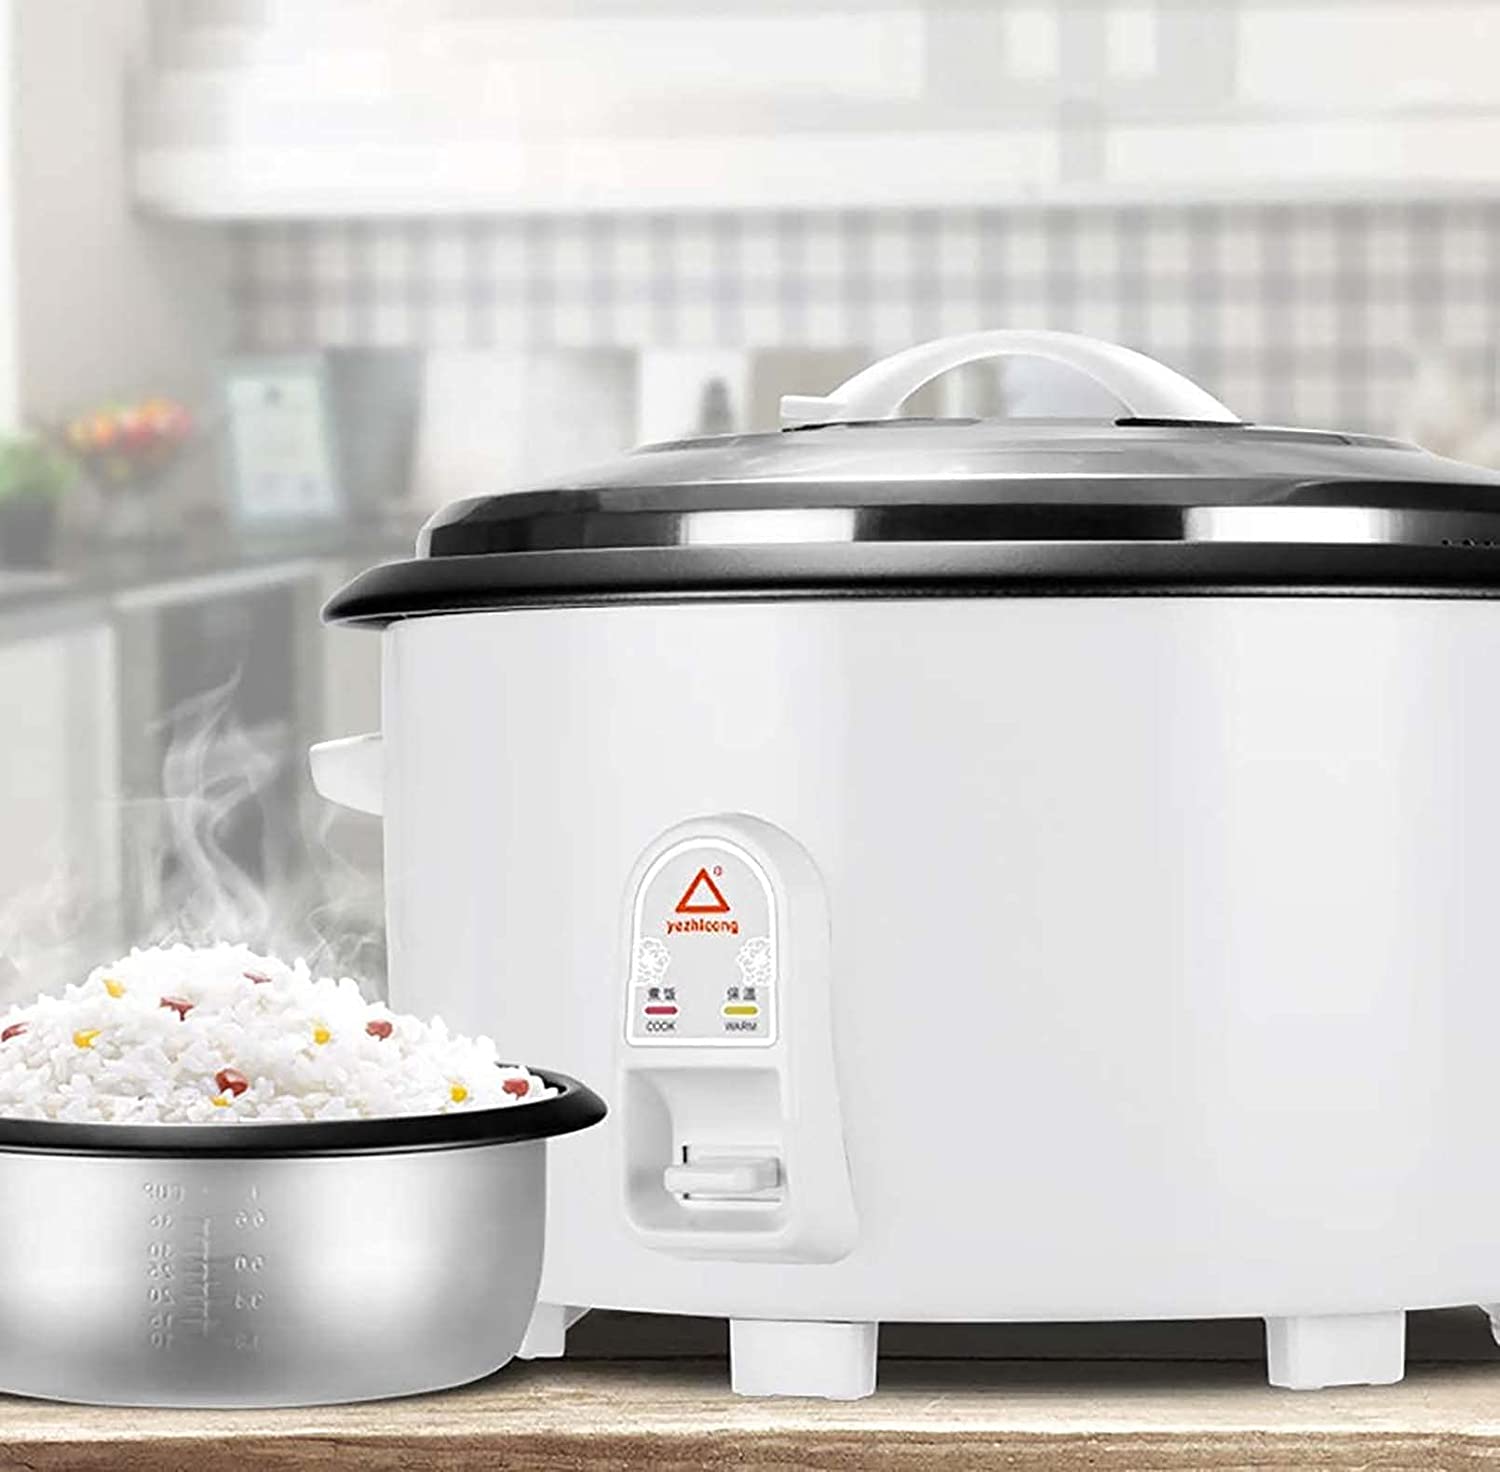 23 L Commercial Rice Cooker Restaurant Hotel Rice Cooker Non Stick Pot